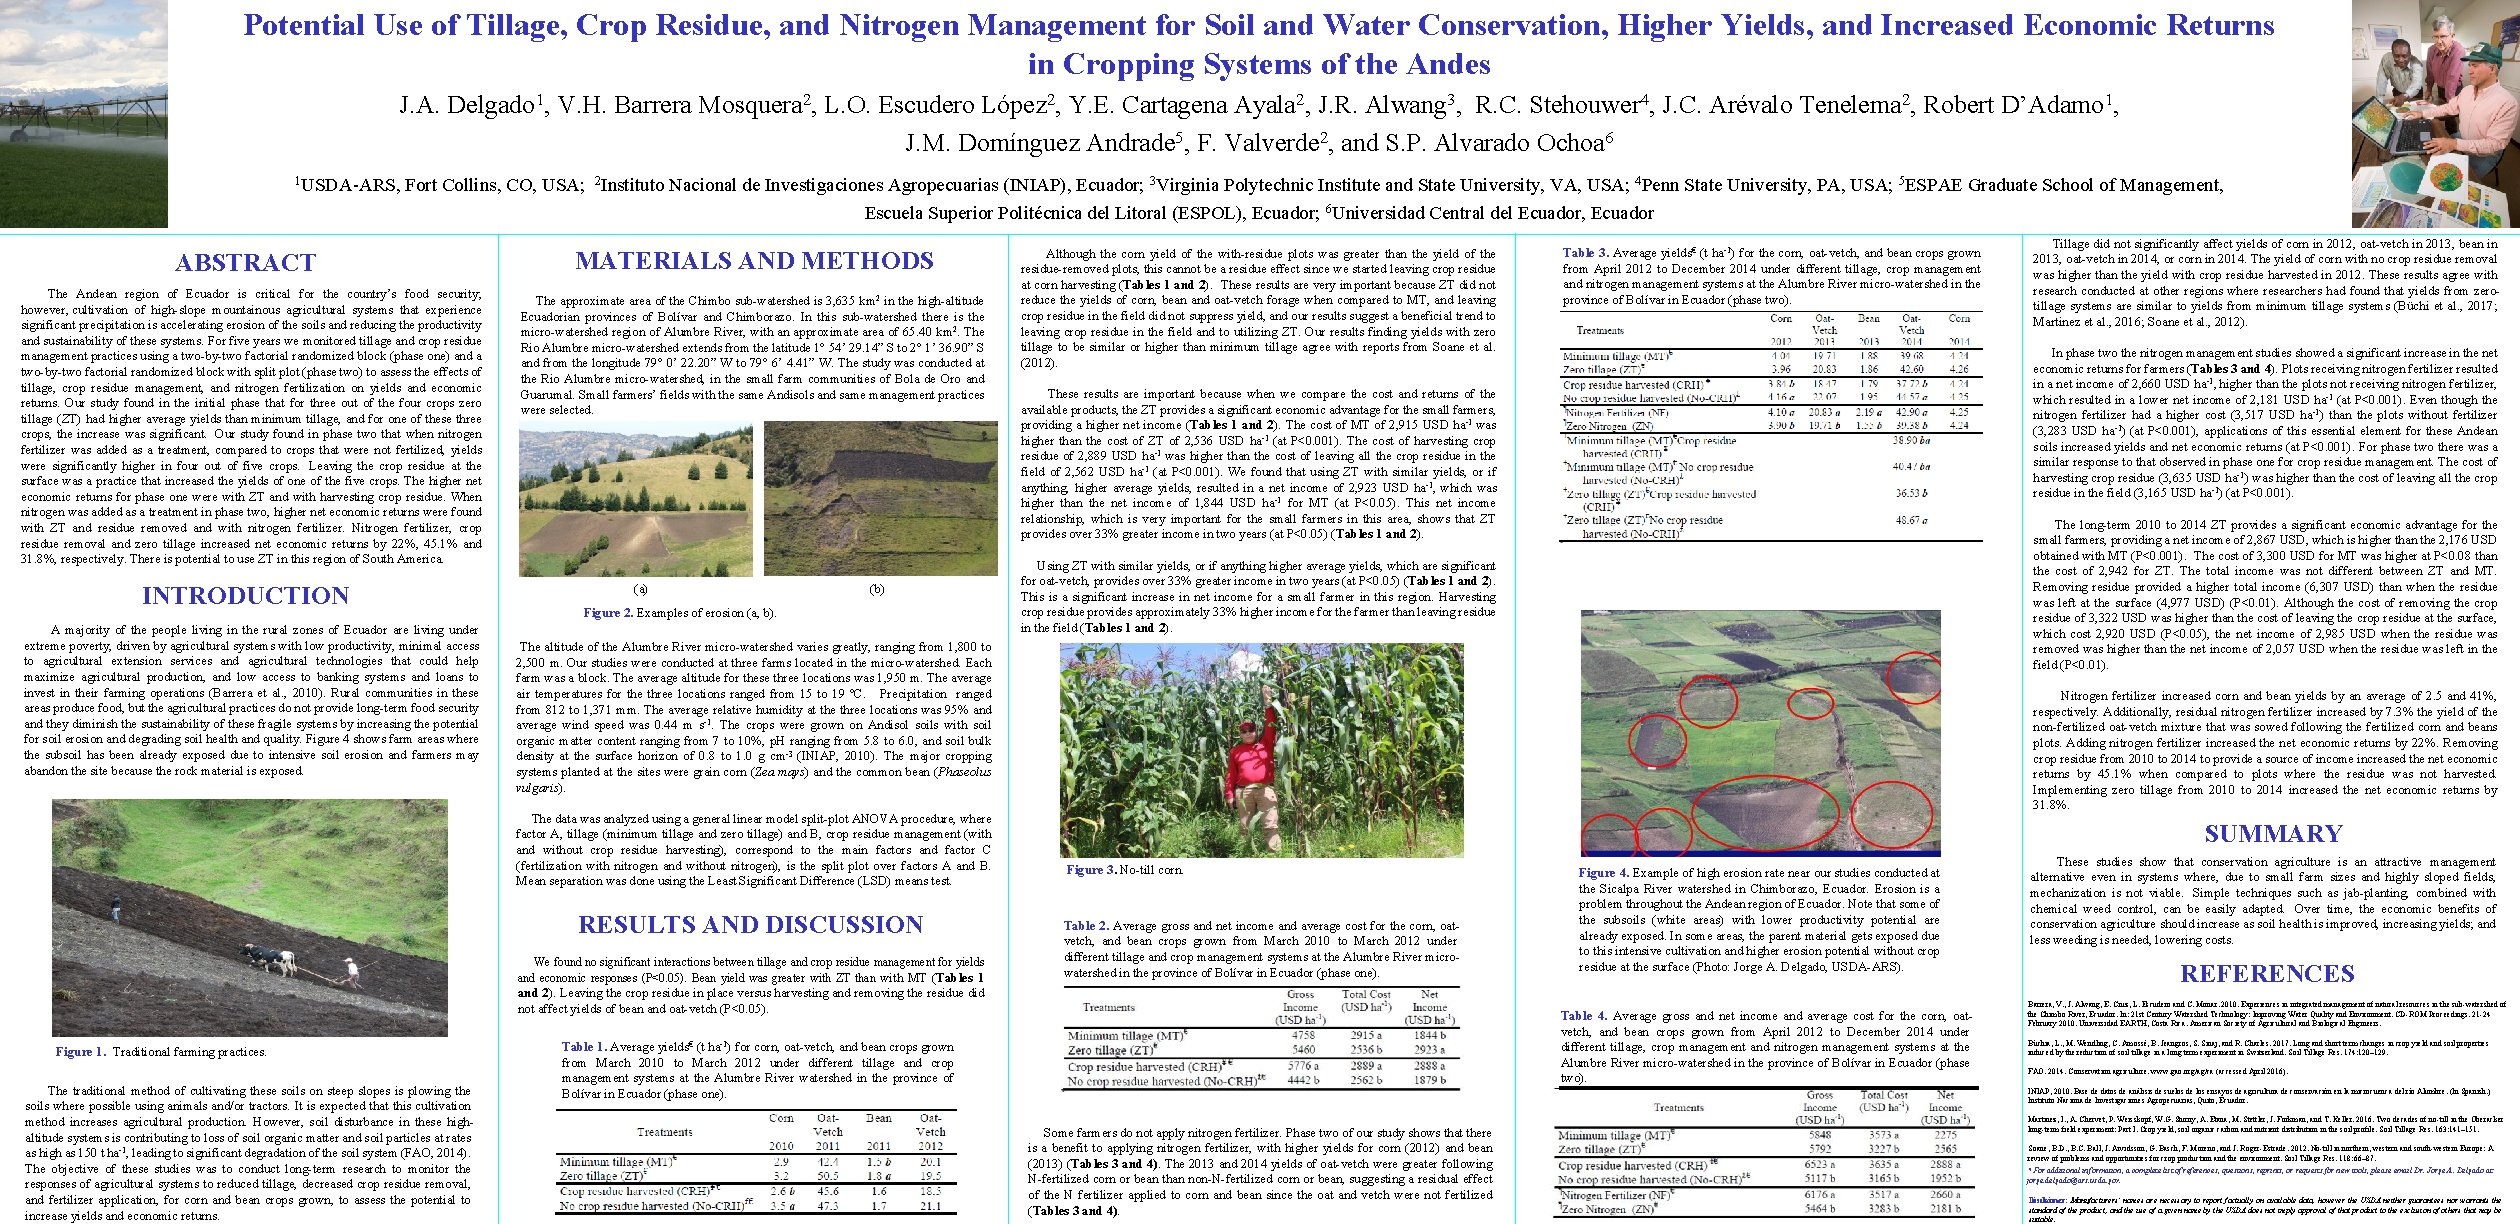 Potential Use of Tillage, Crop Residue, and Nitrogen Management for Soil and Water Conservation,